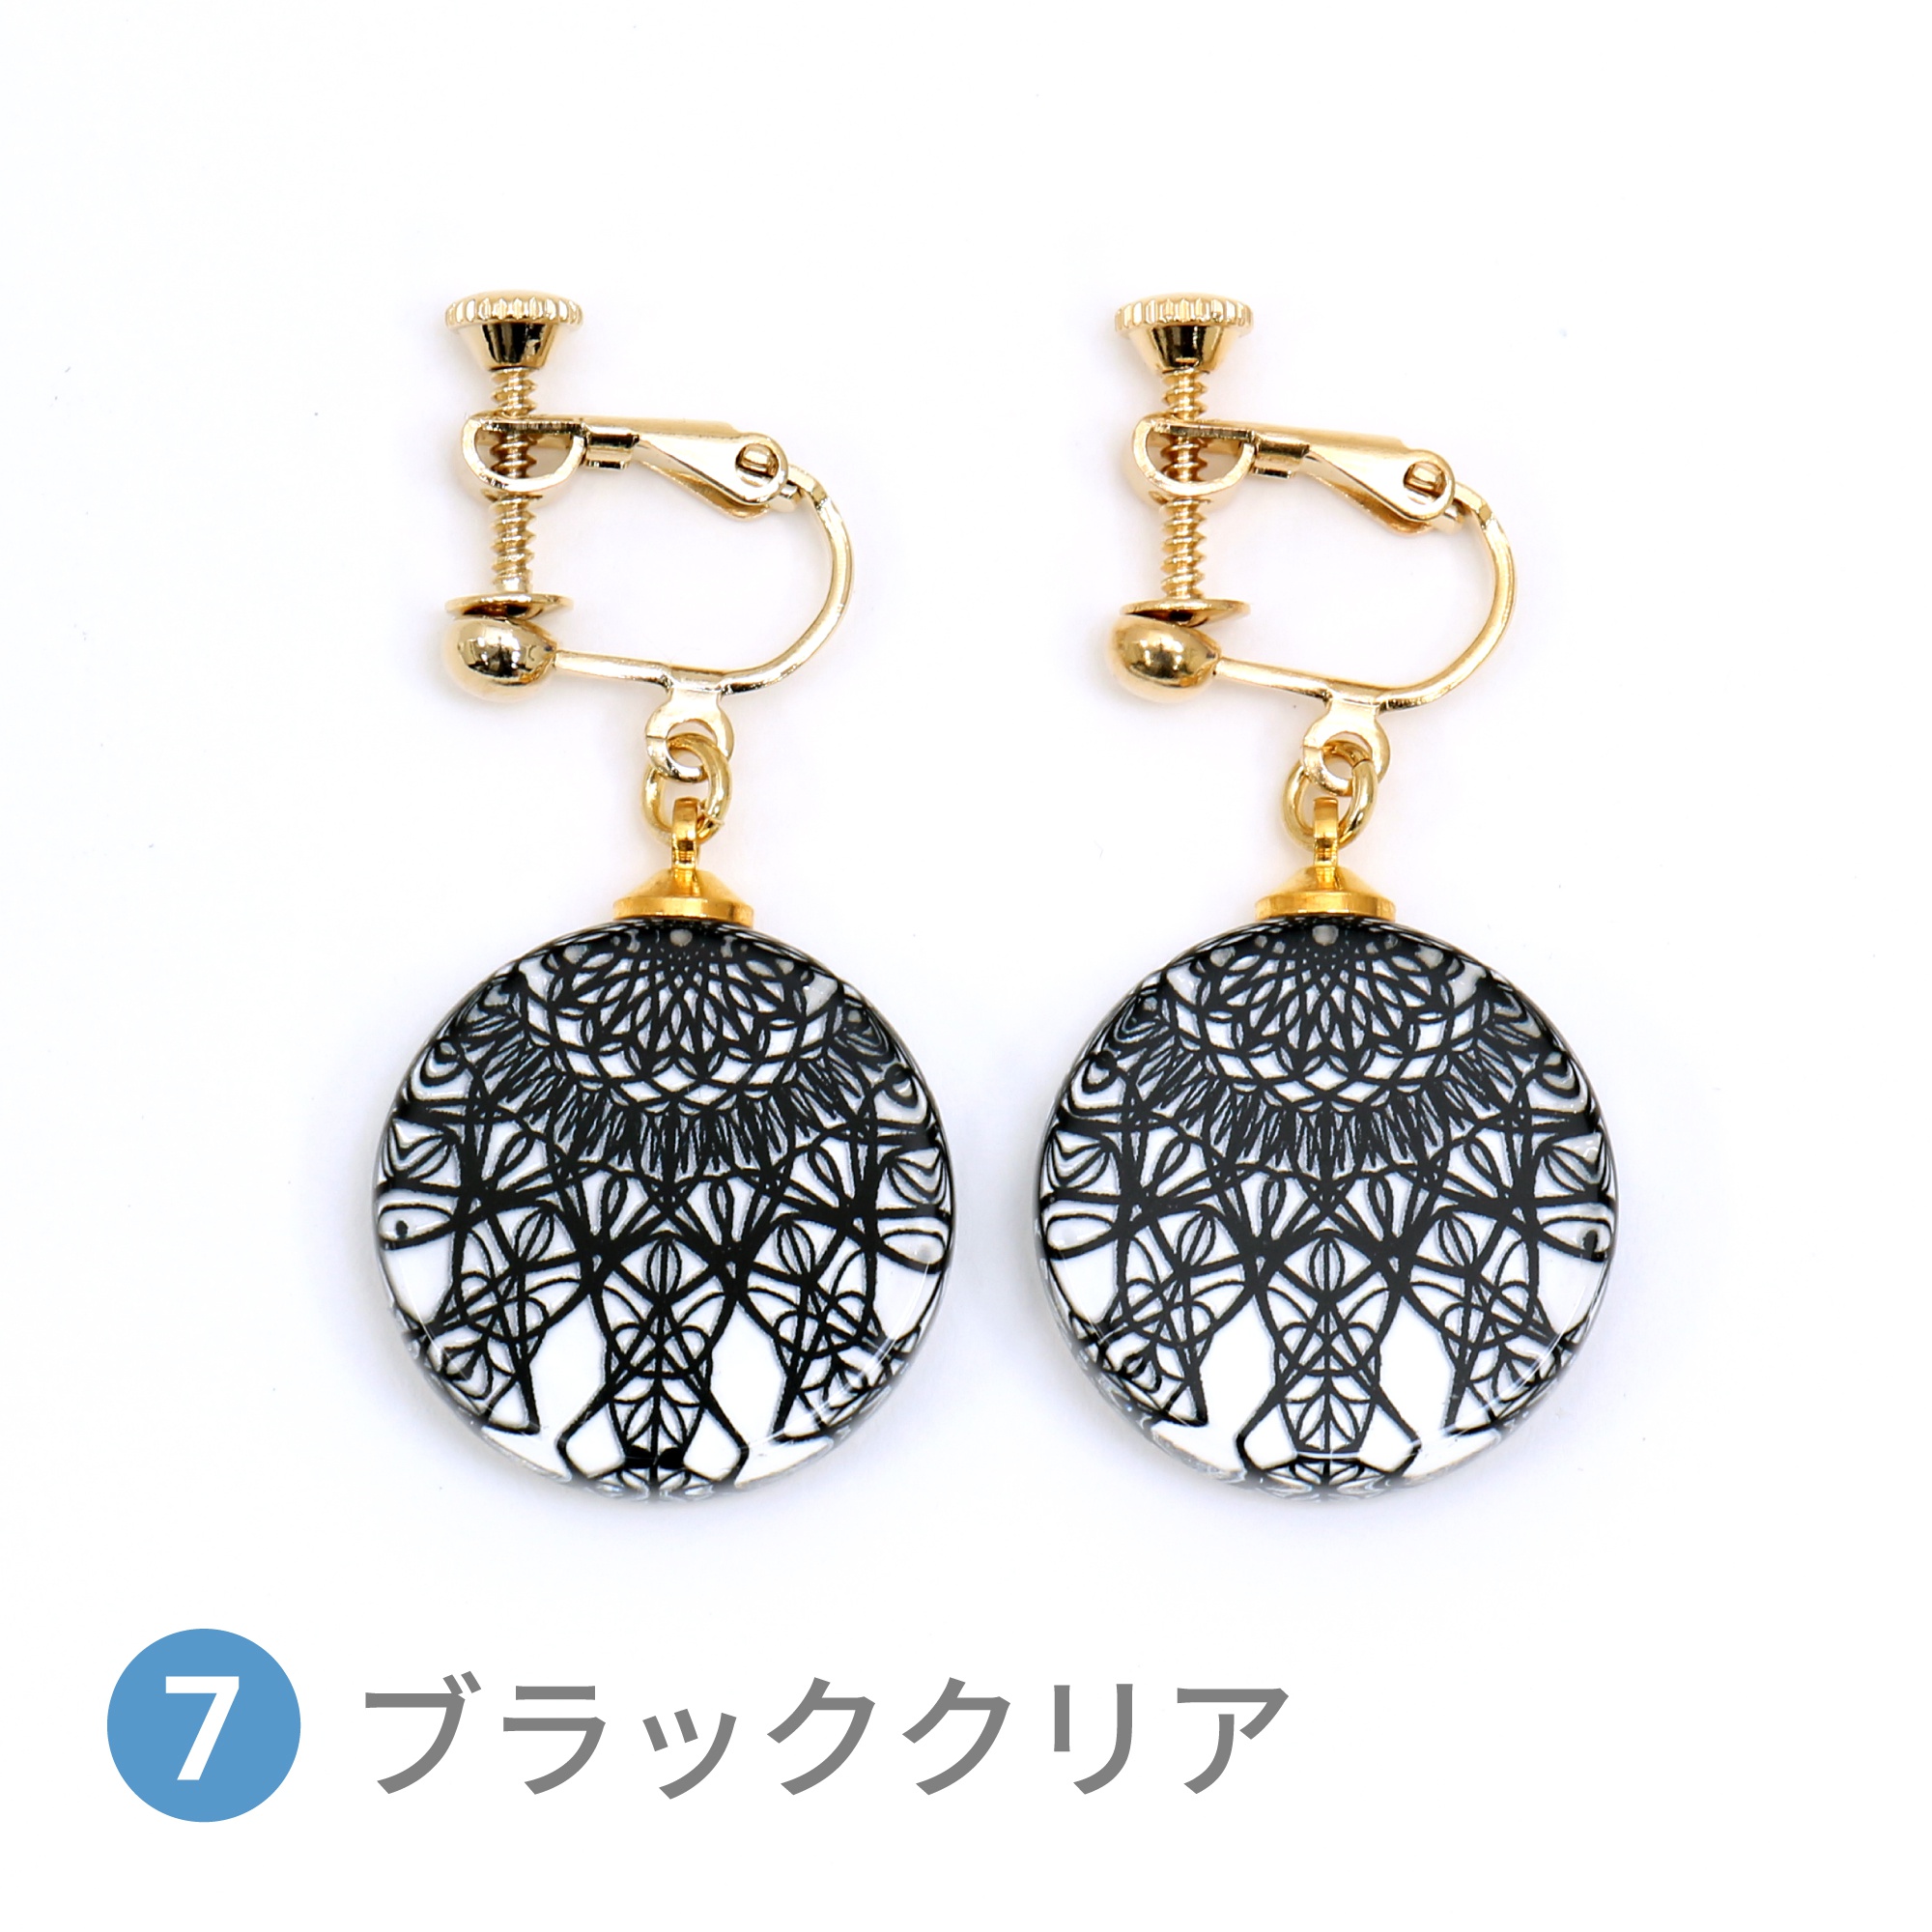 Glass accessories Earring LACE black clear round shape